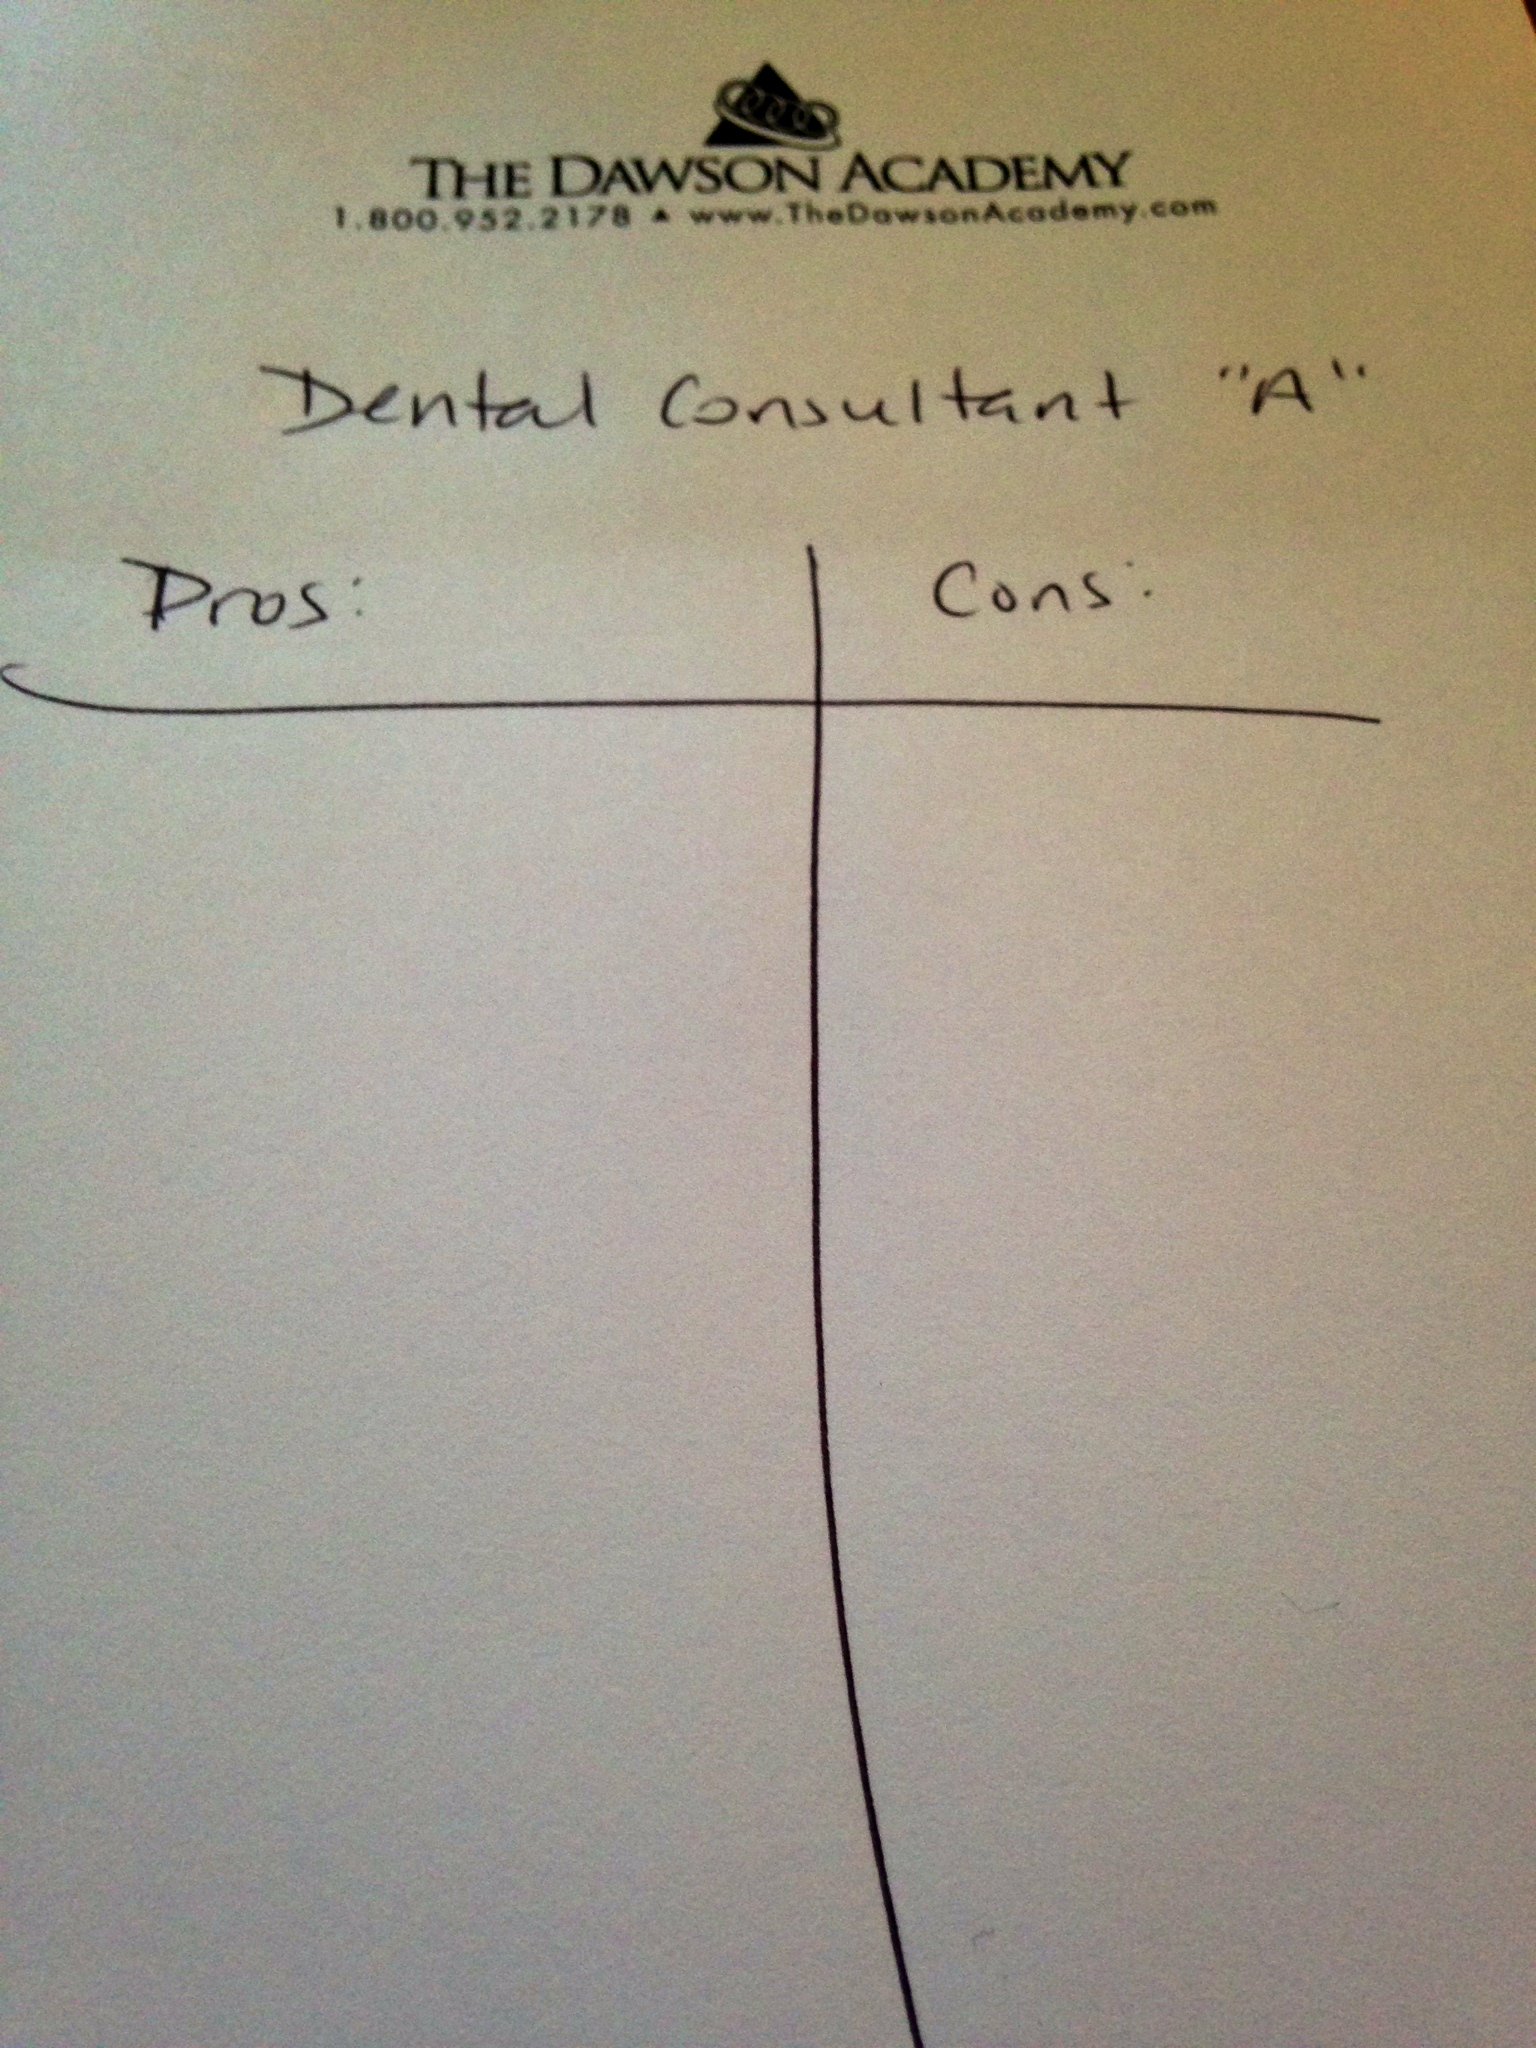 Finding the best dental consultant